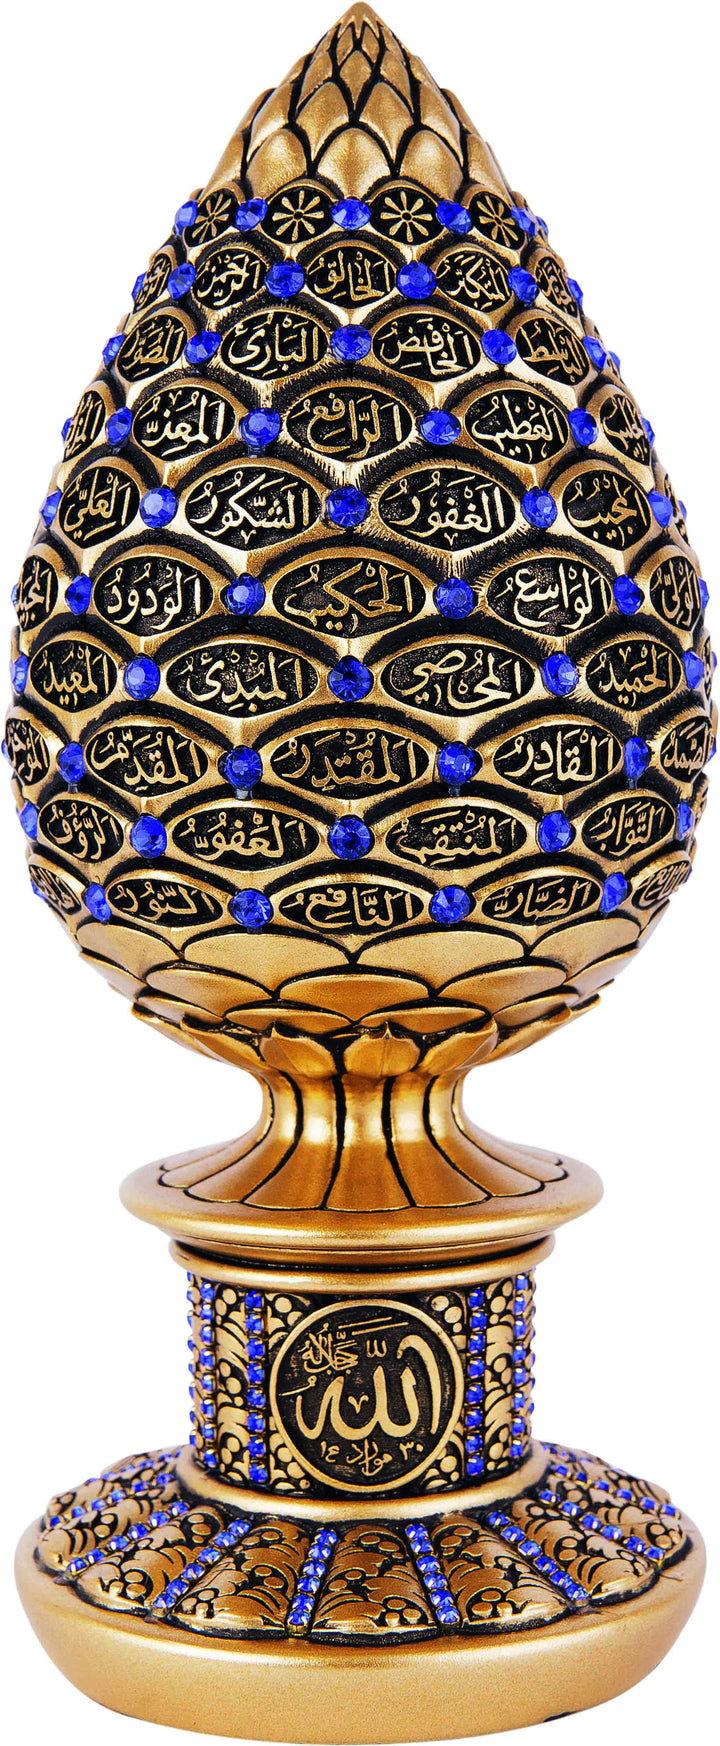 Islamic Table Decor Golden pine cone with Blue stones - 99 Names of Allah Alif collection BB-0913-1632-theislamicshop.com